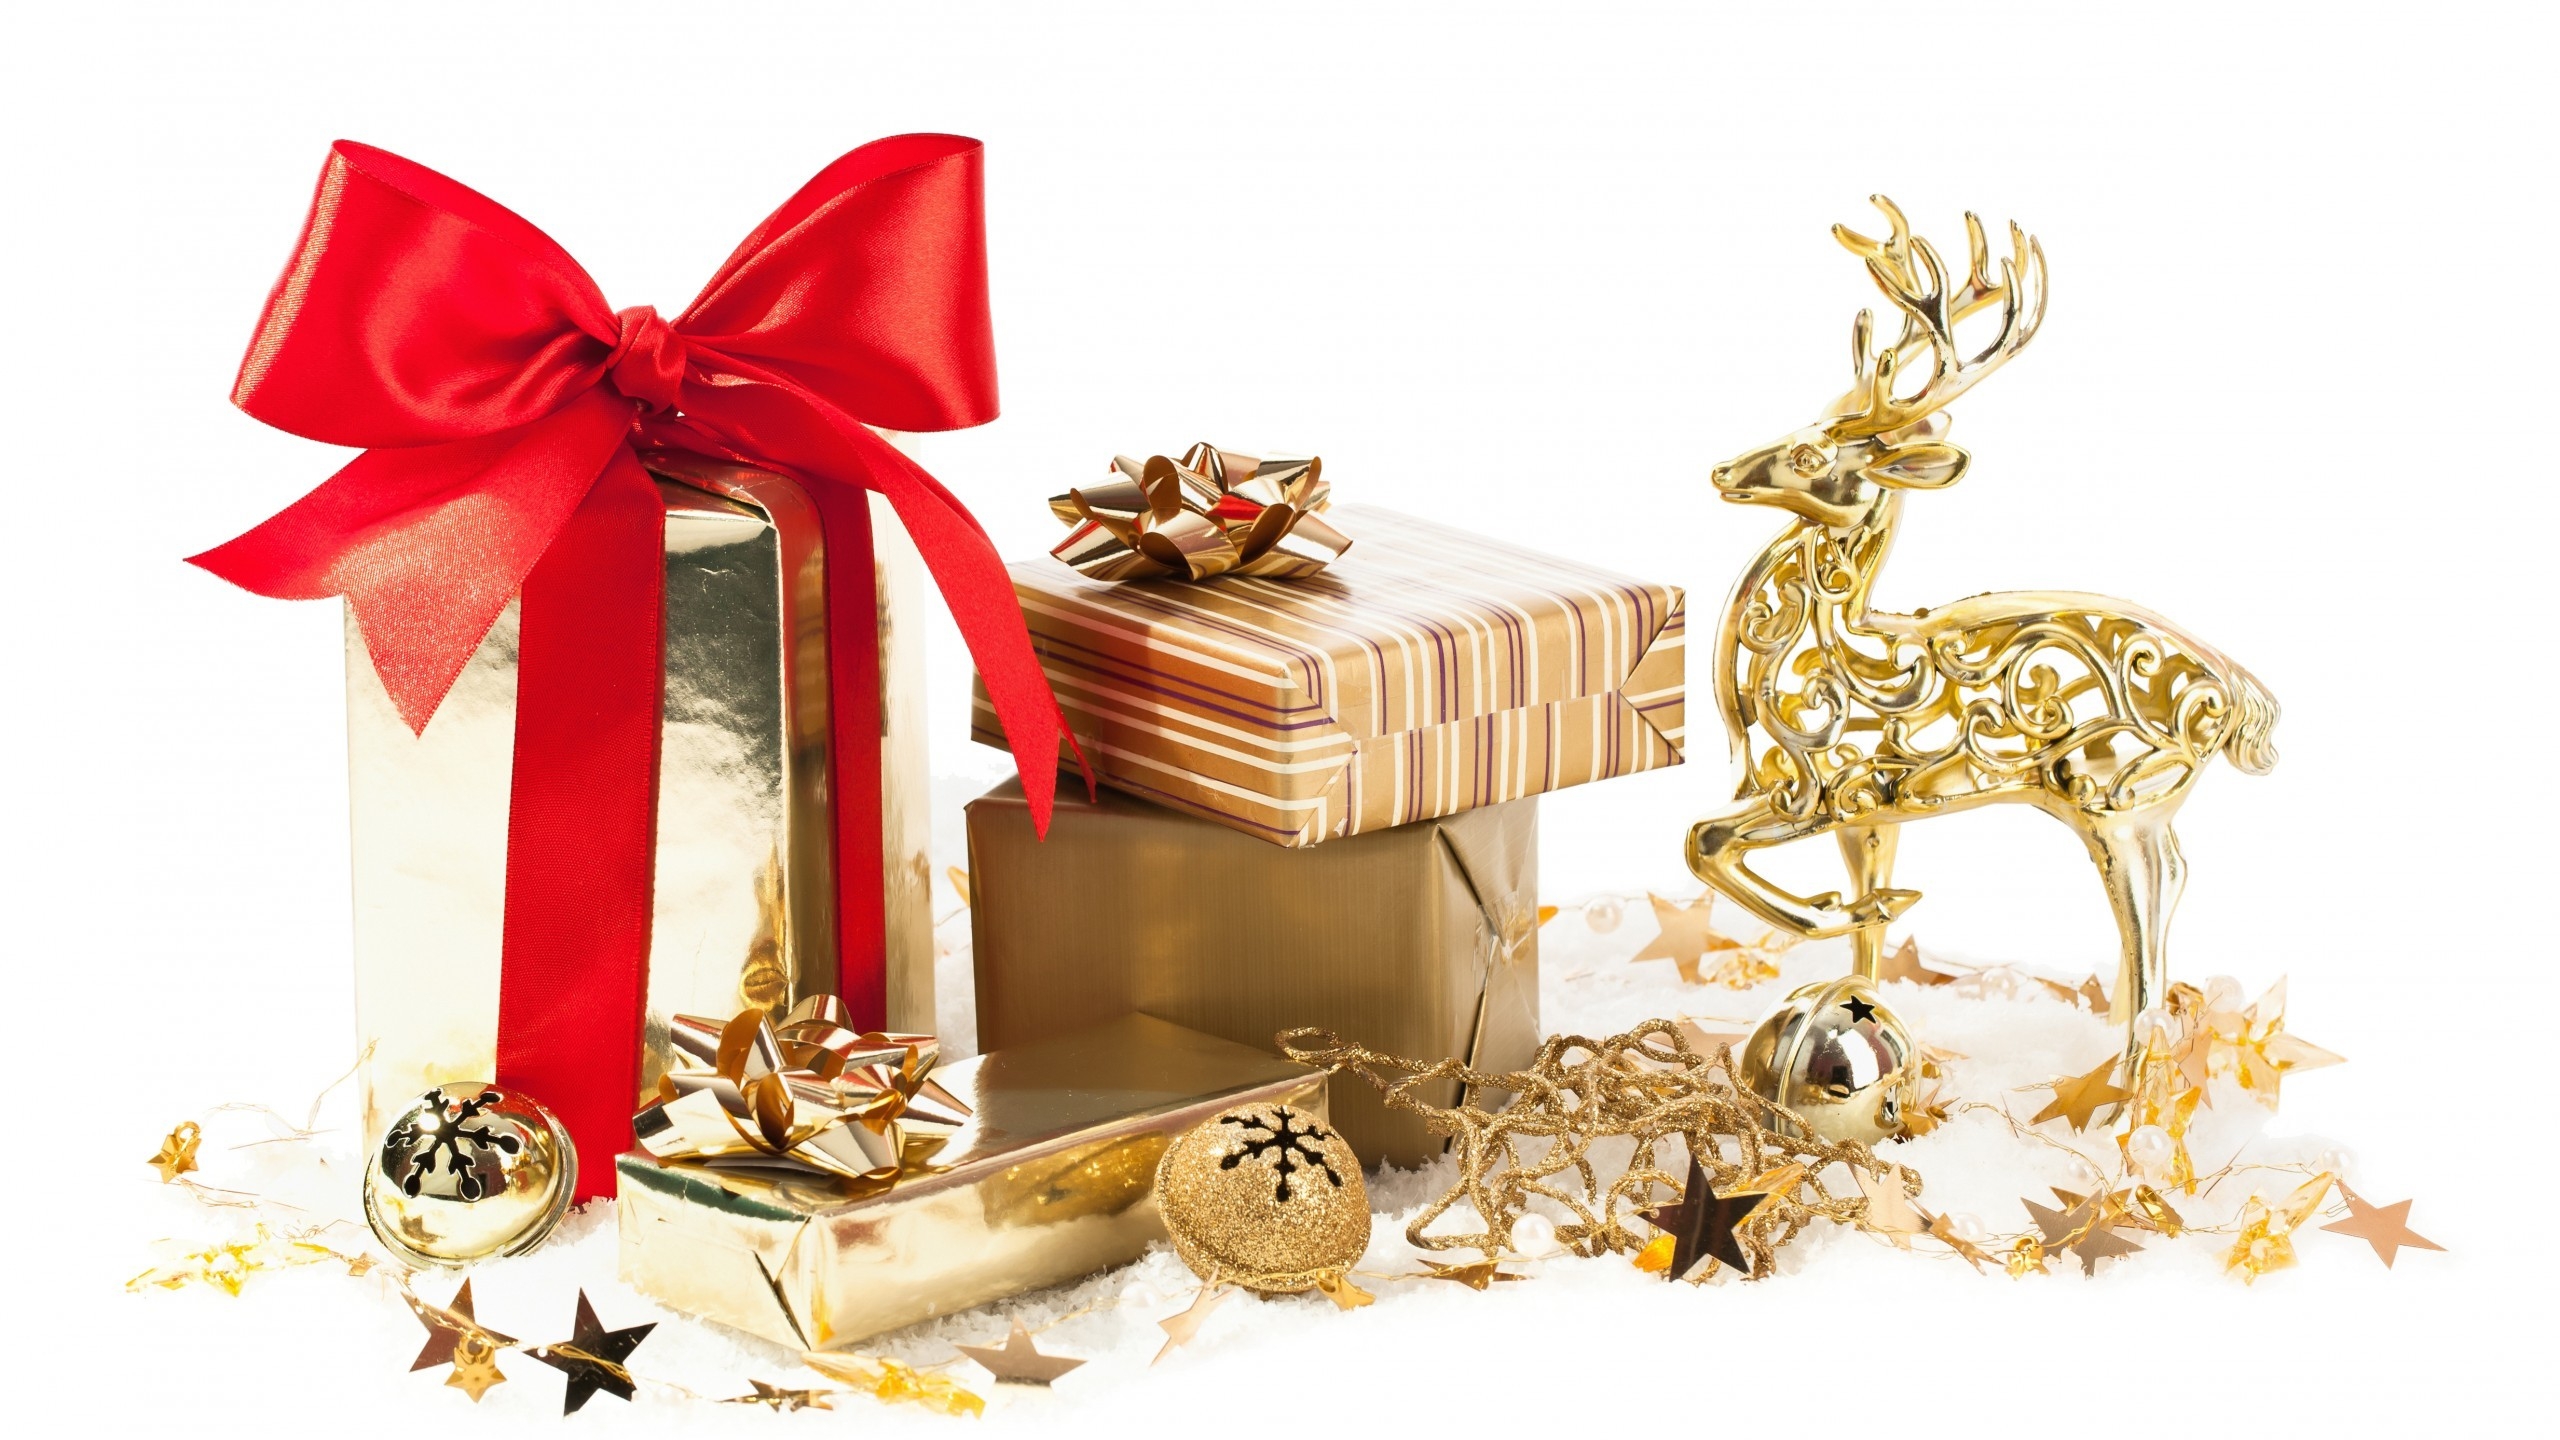 Ready Gifts for Christmas for 2560x1440 HDTV resolution